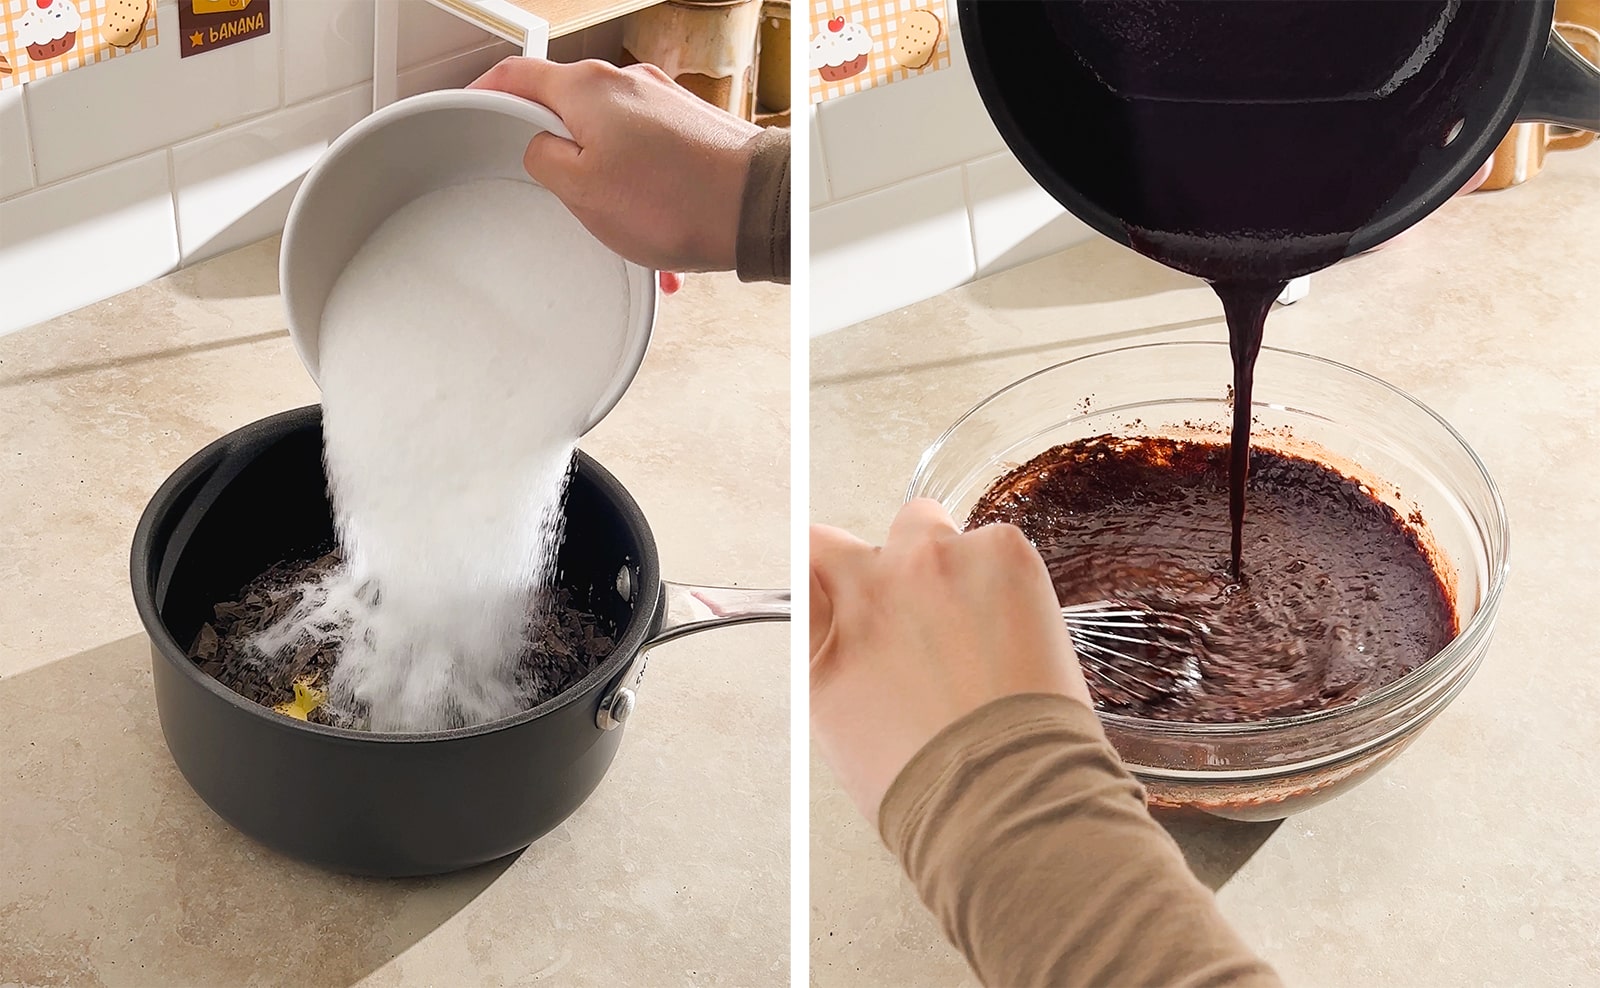 Left to right: pouring sugar into pot, pouring melted chocolate mixture into bowl of brownie batter.